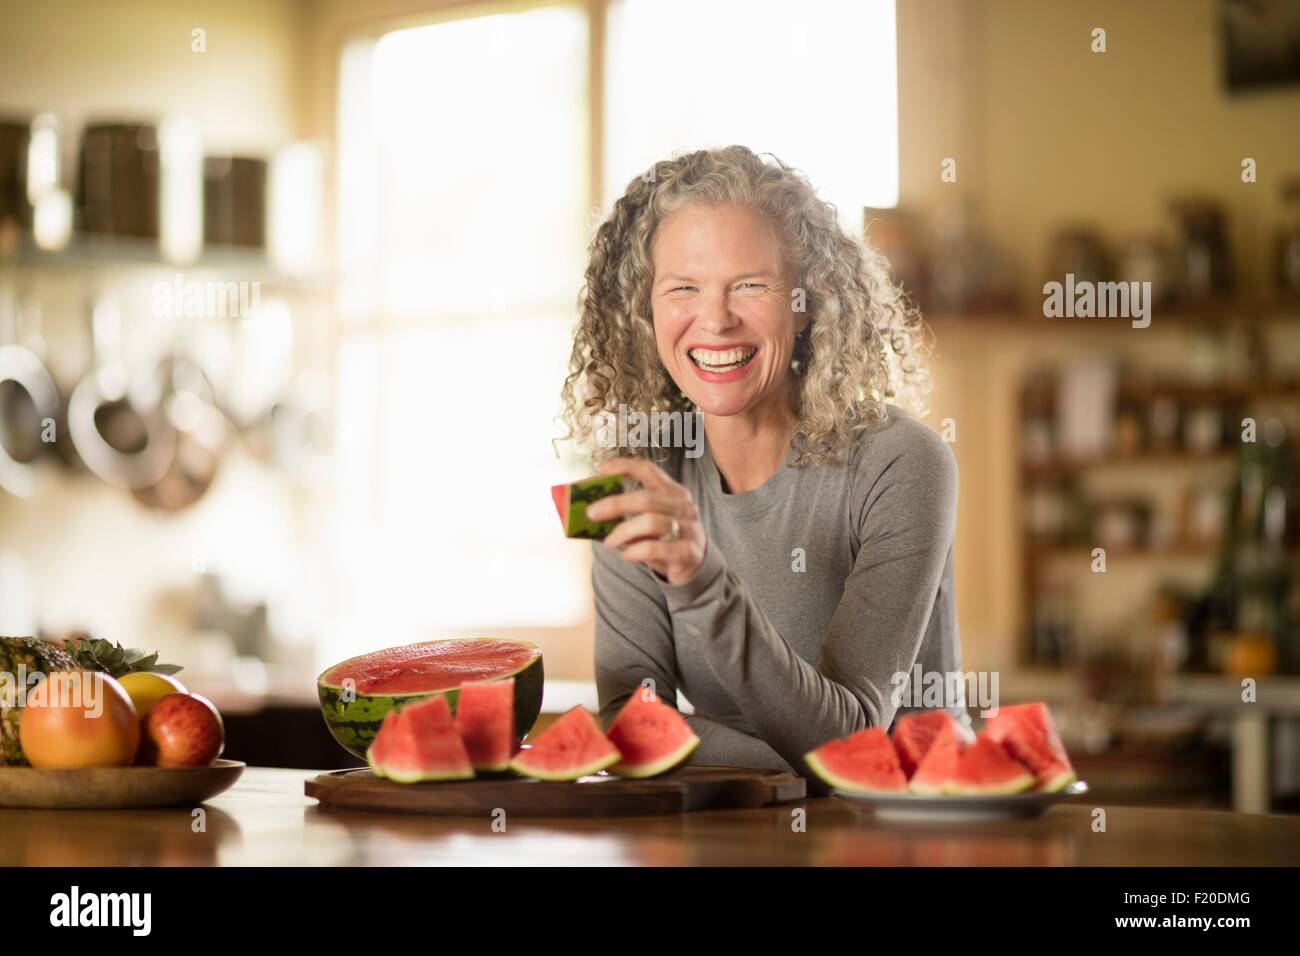 Portrait of mature woman eating watermelon in kitchen Stock Photo